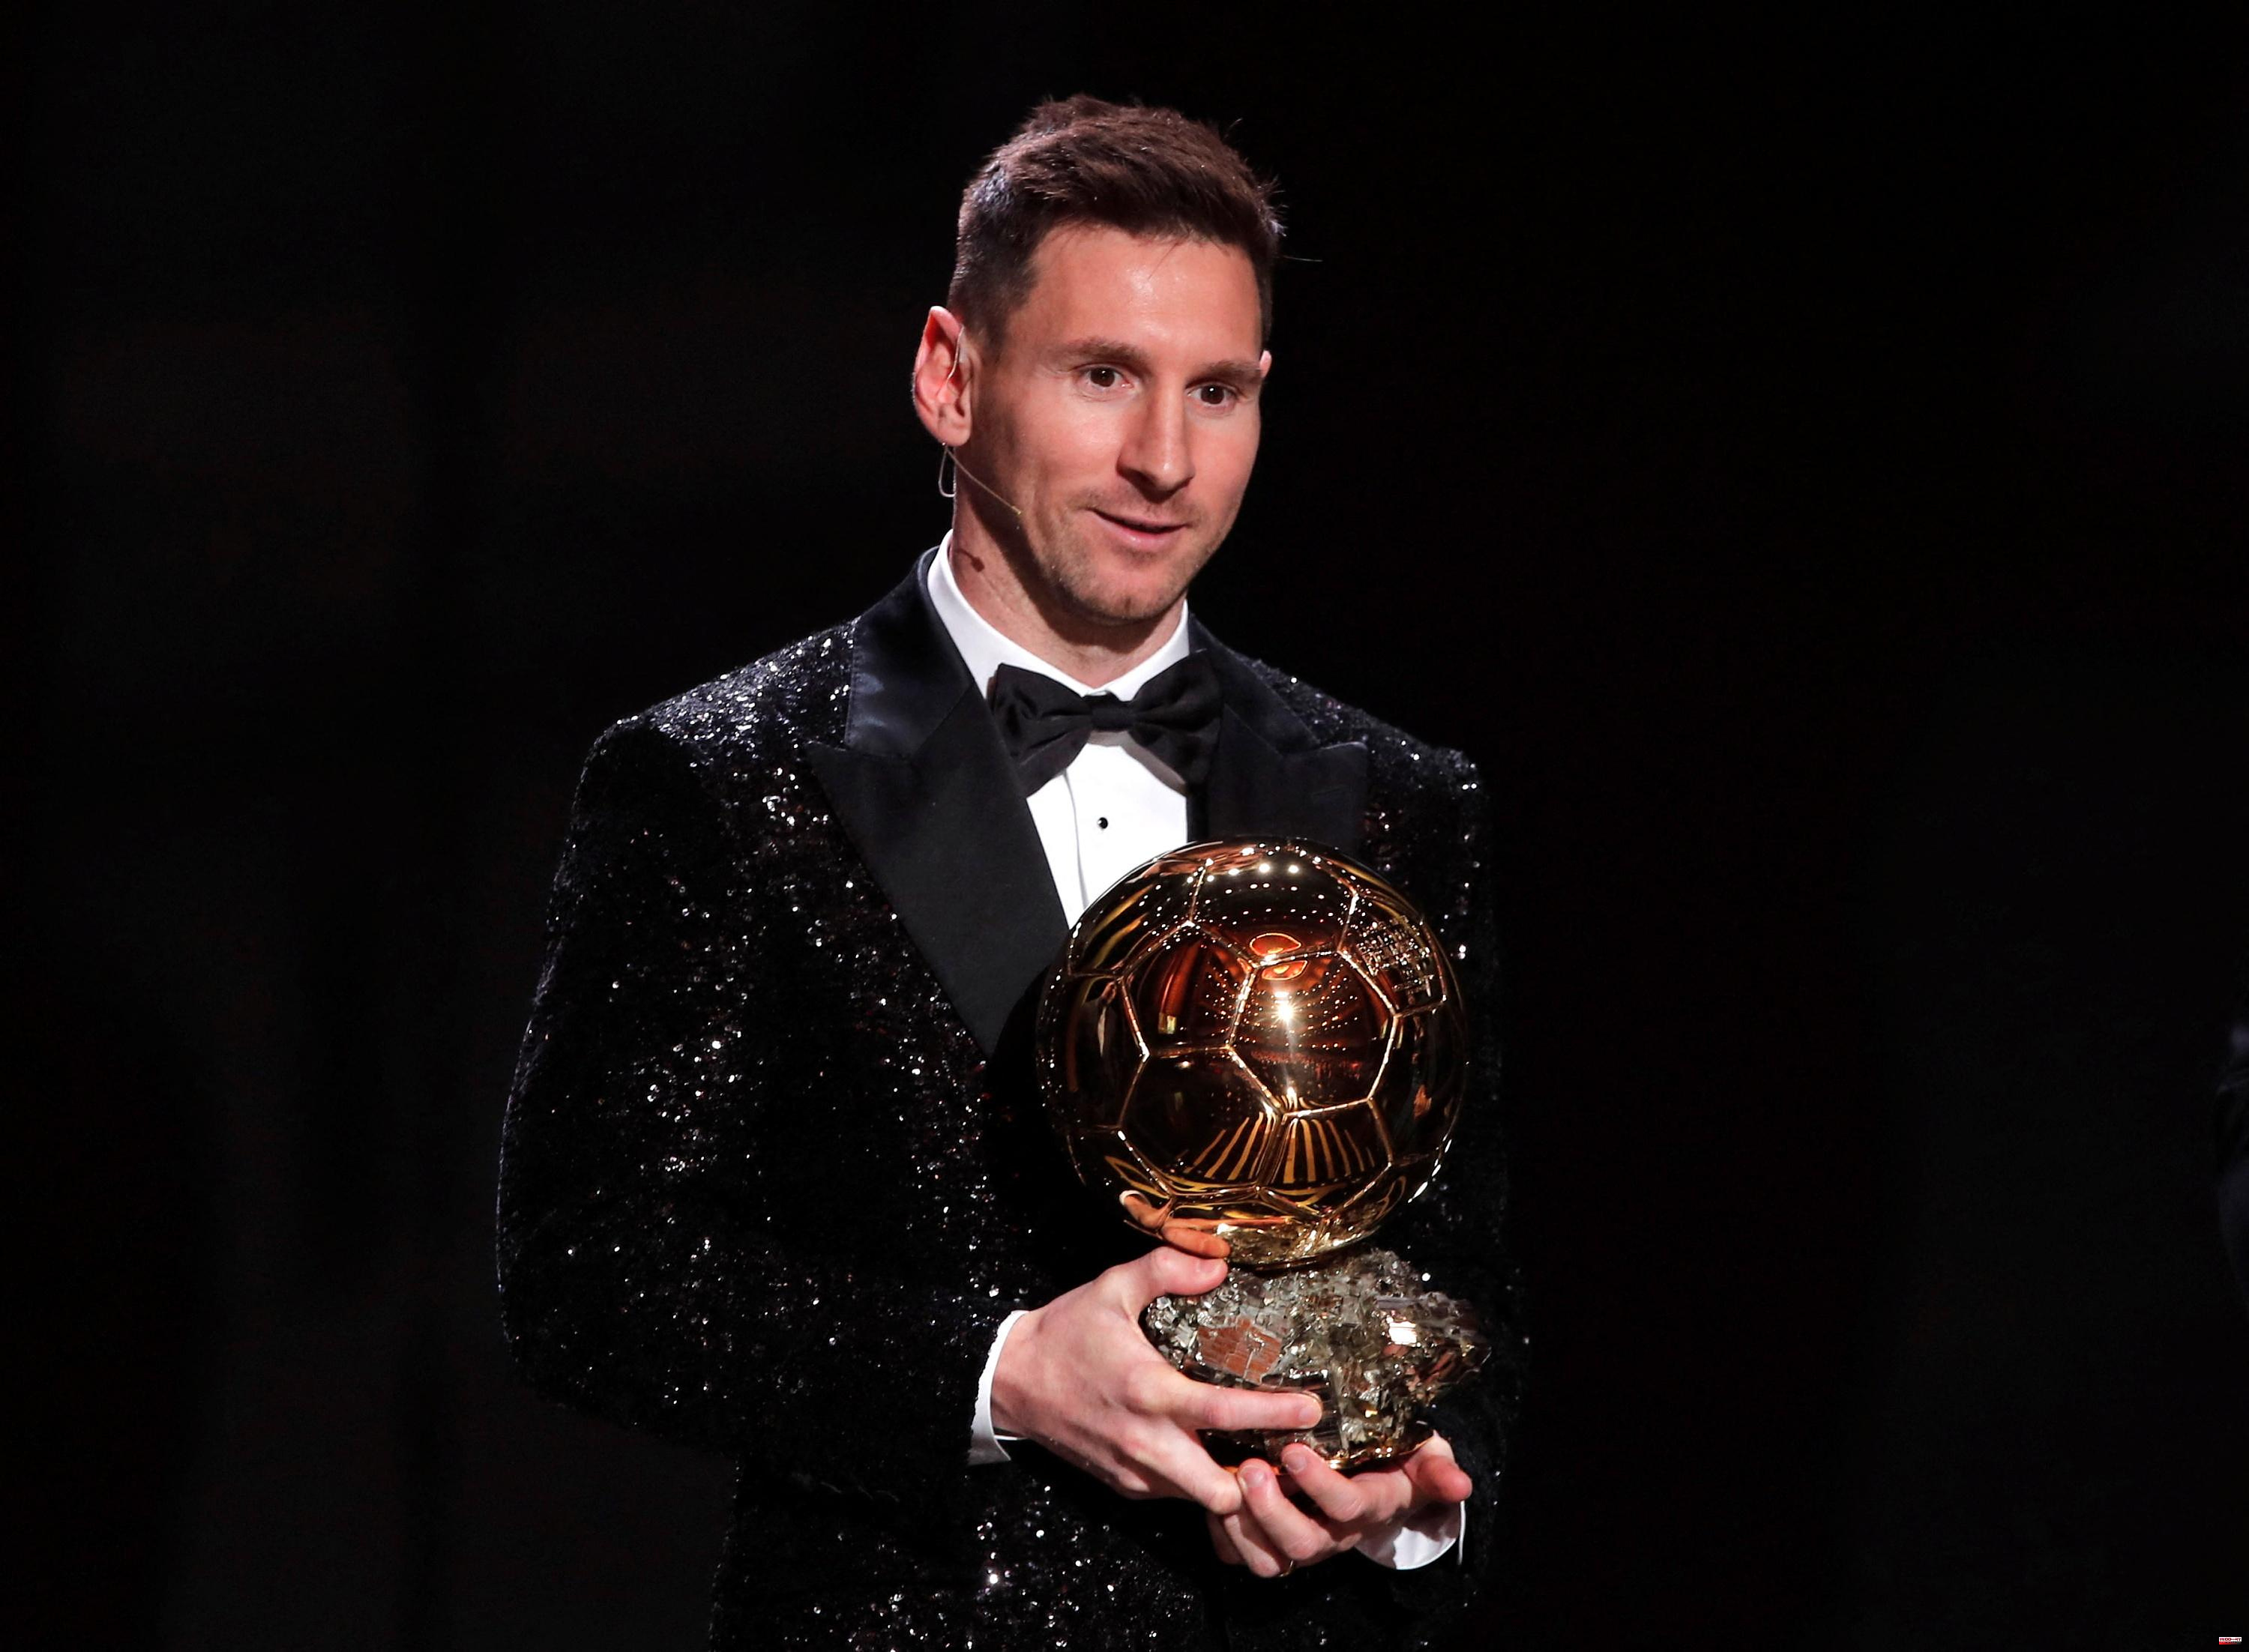 Football: the next Ballon d'Or will be awarded on October 17 in Paris